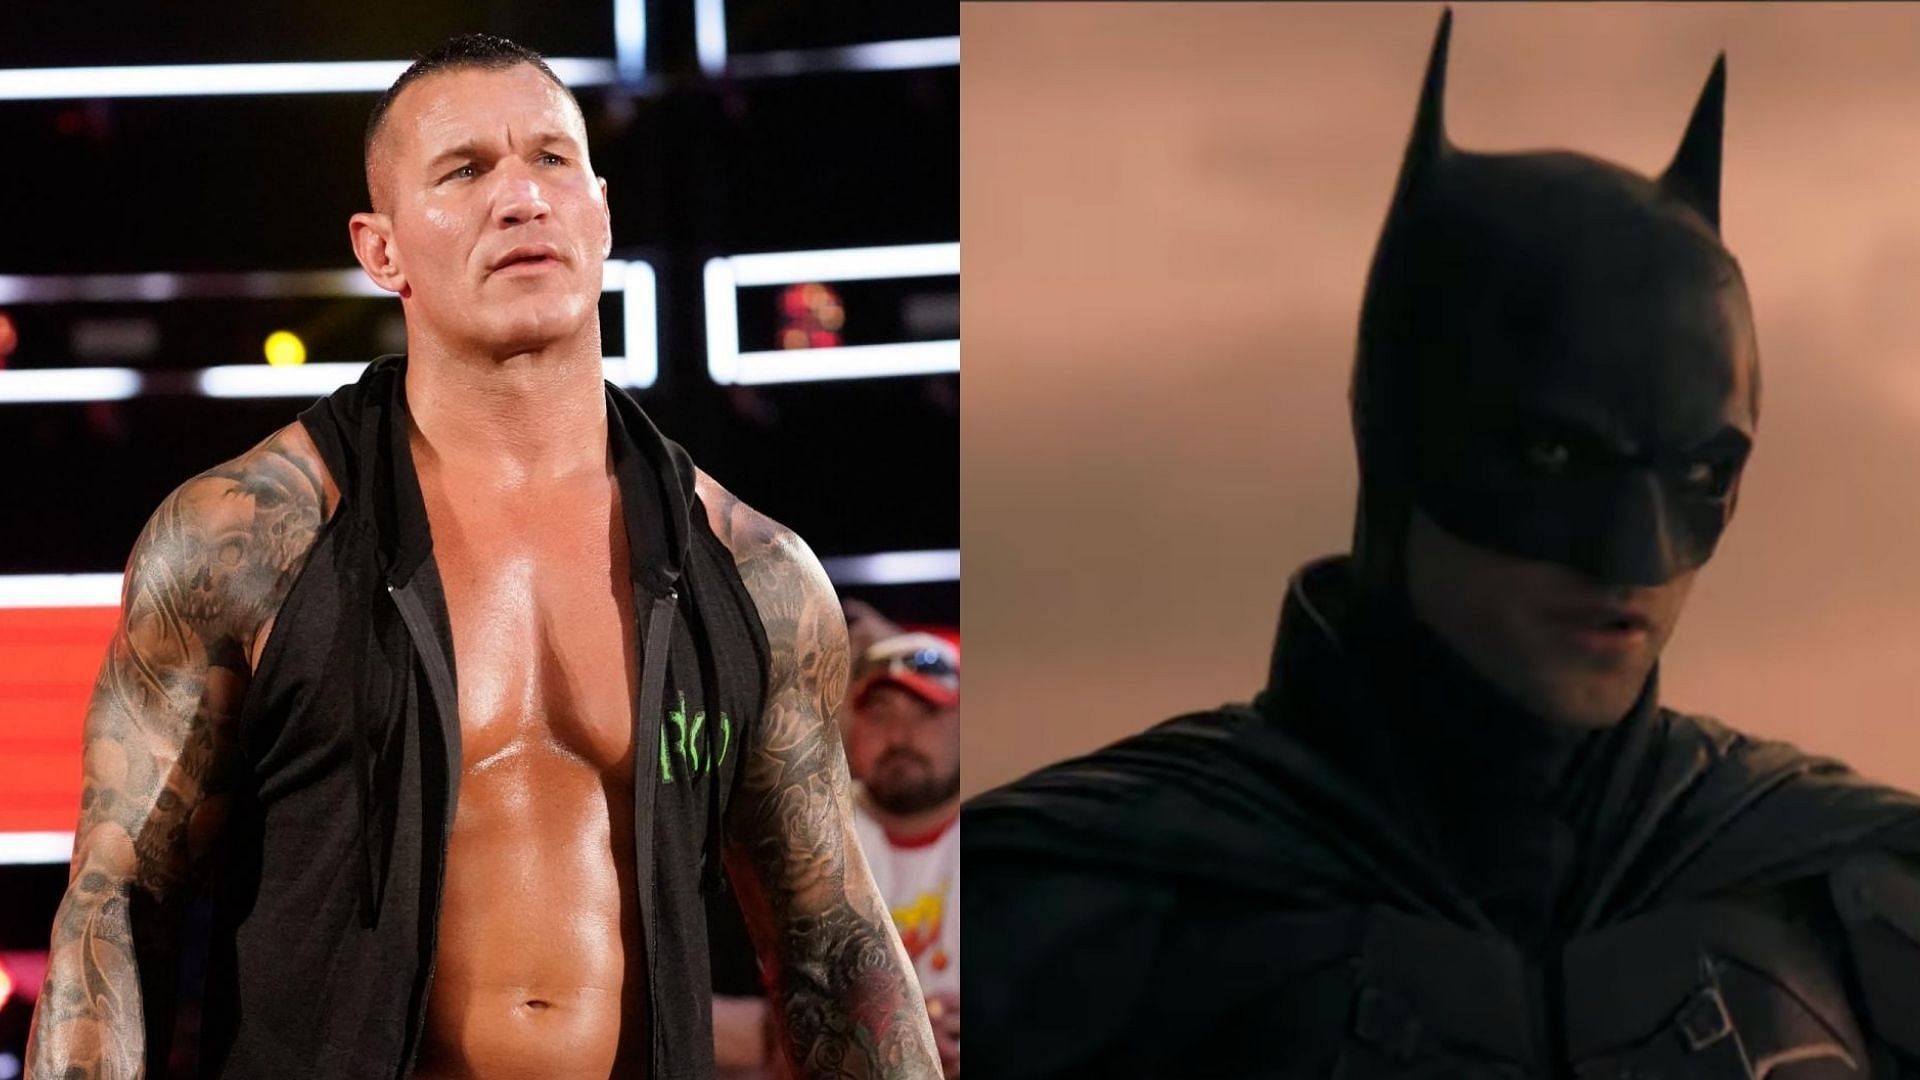 The Batman universe could have some WWE counterparts take their place